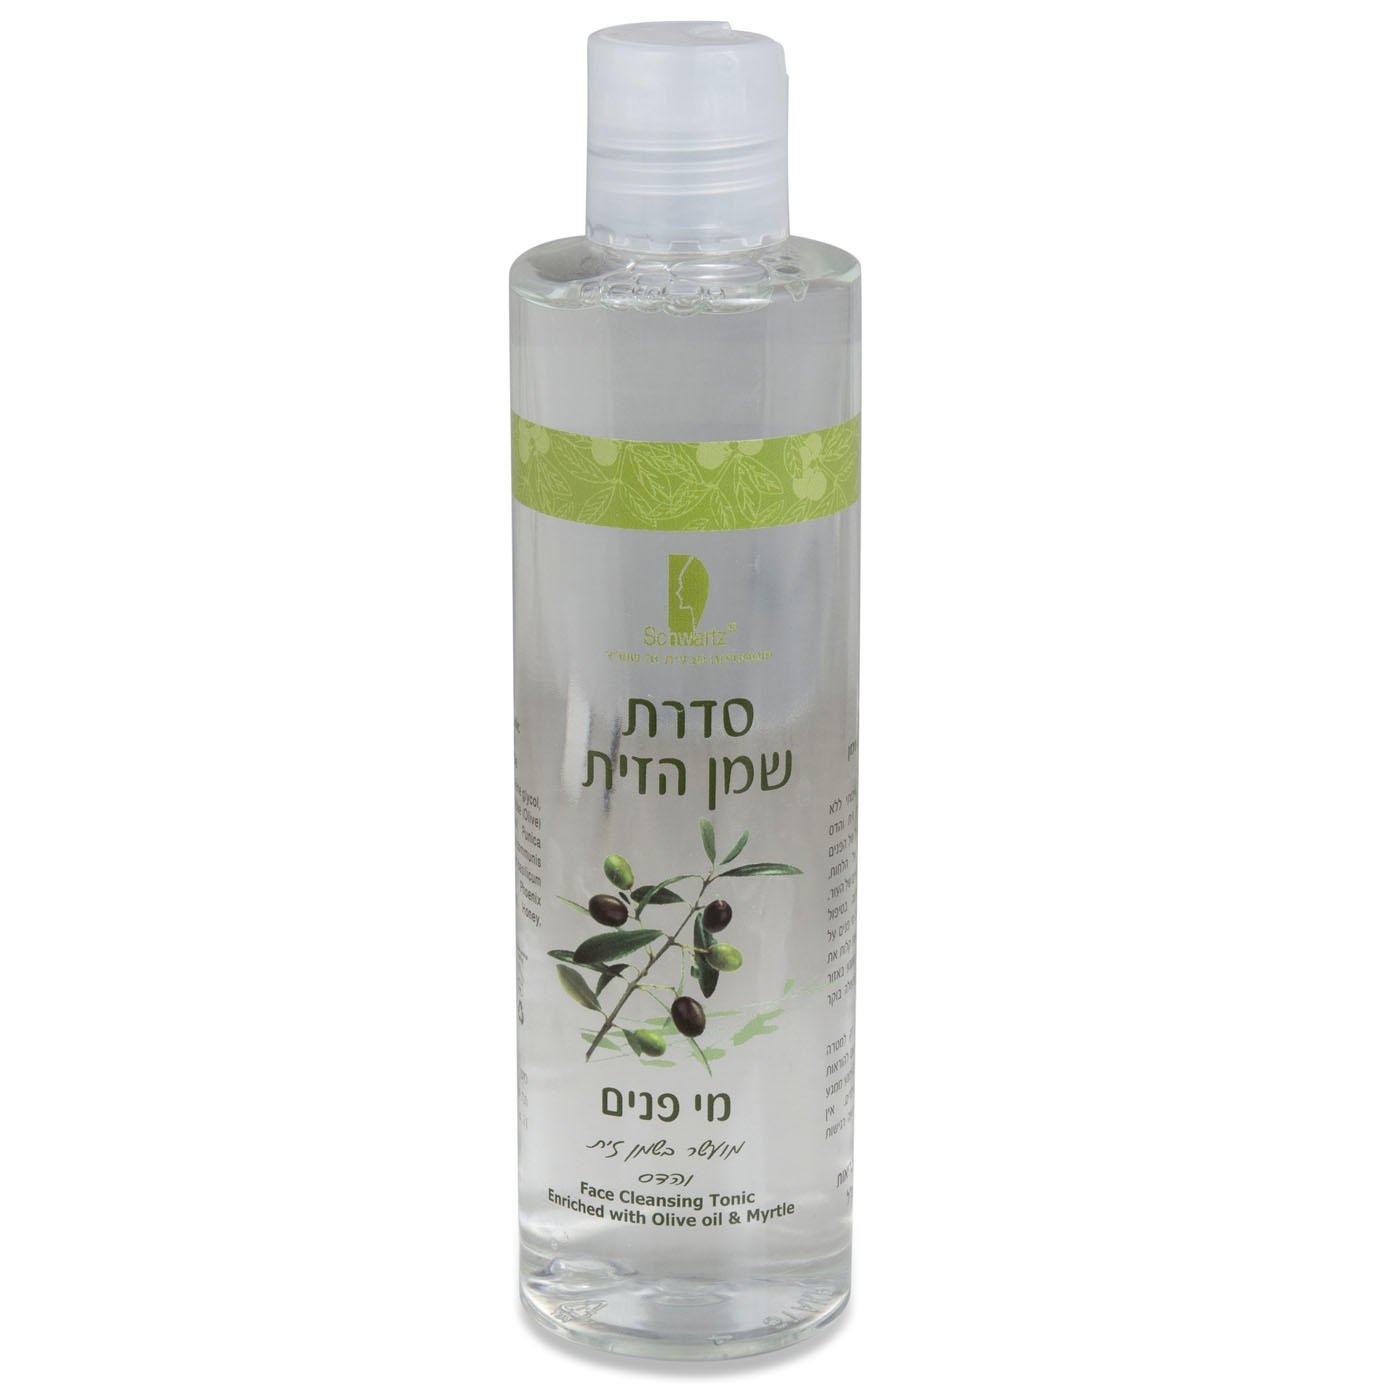 Schwartz Olive Oil and Myrtle Face Cleansing Tonic - 1